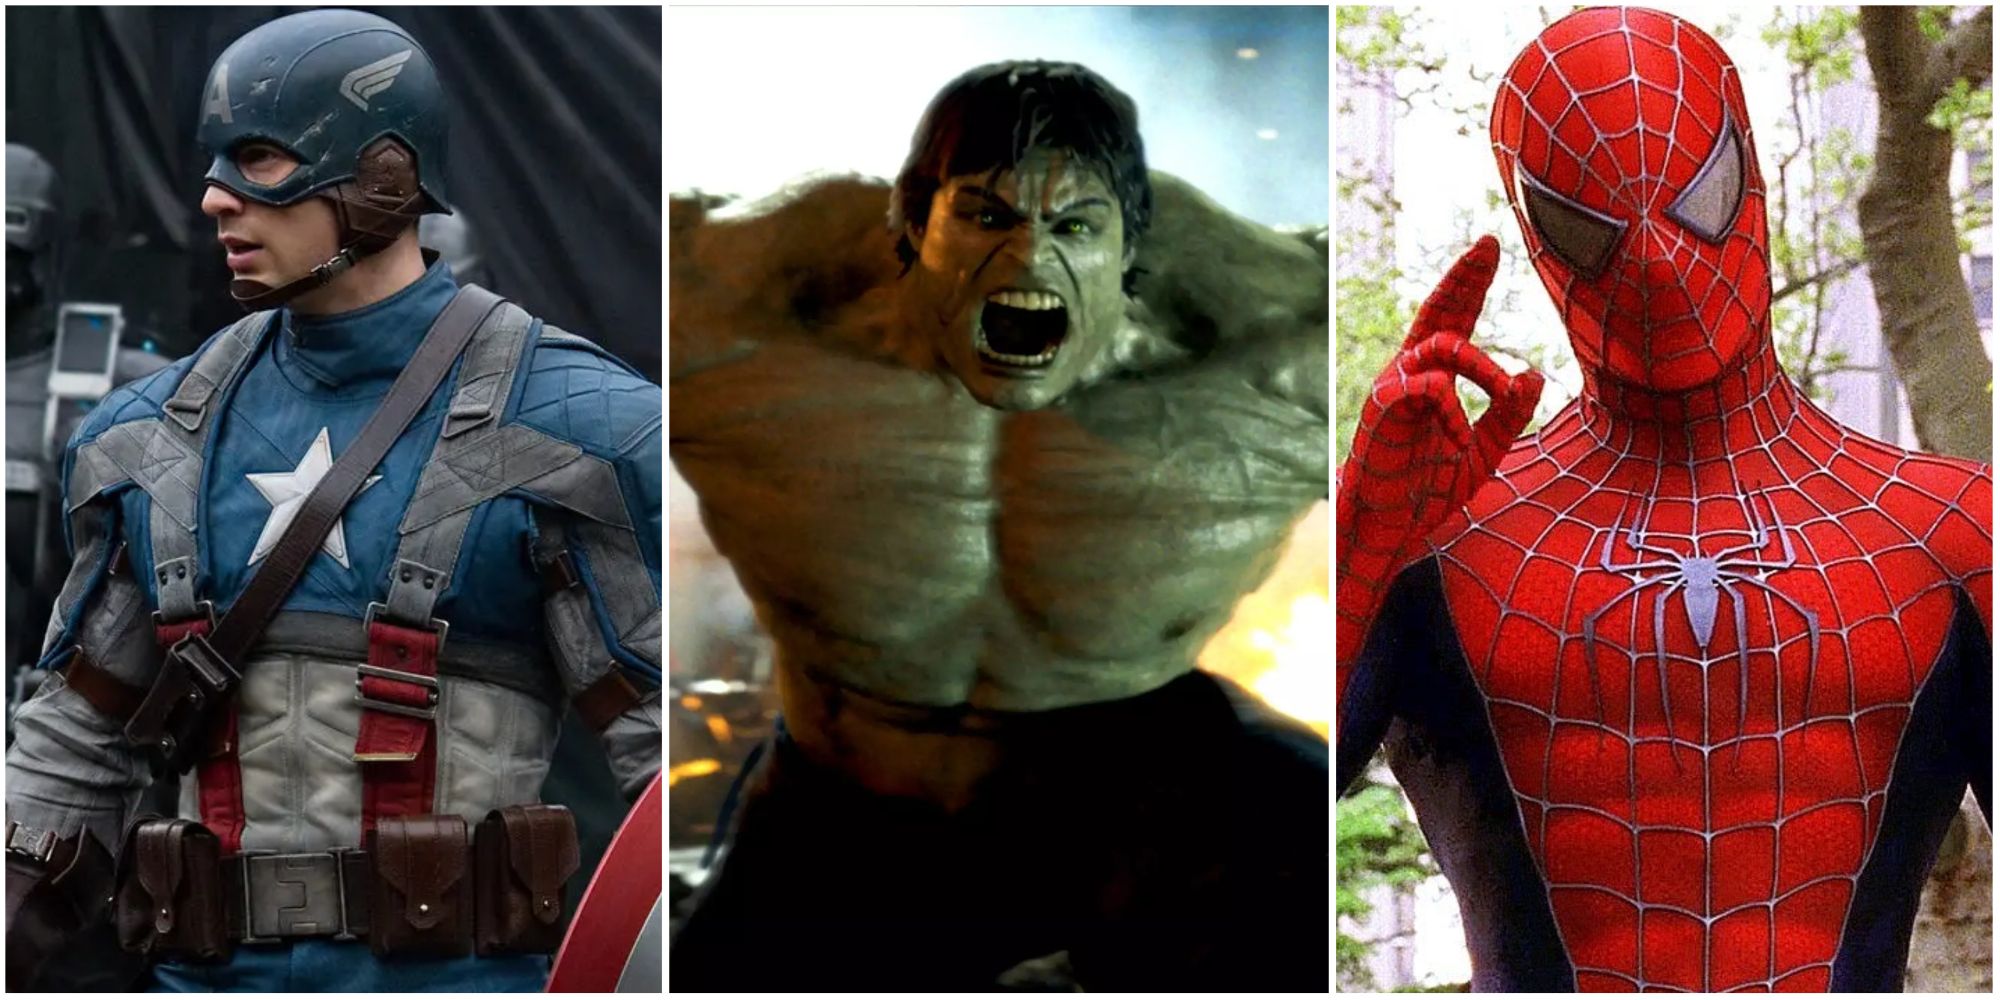 Marvel heroes in Captain America: The First Avenger, The Incredible Hulk, and Spider-Man 2